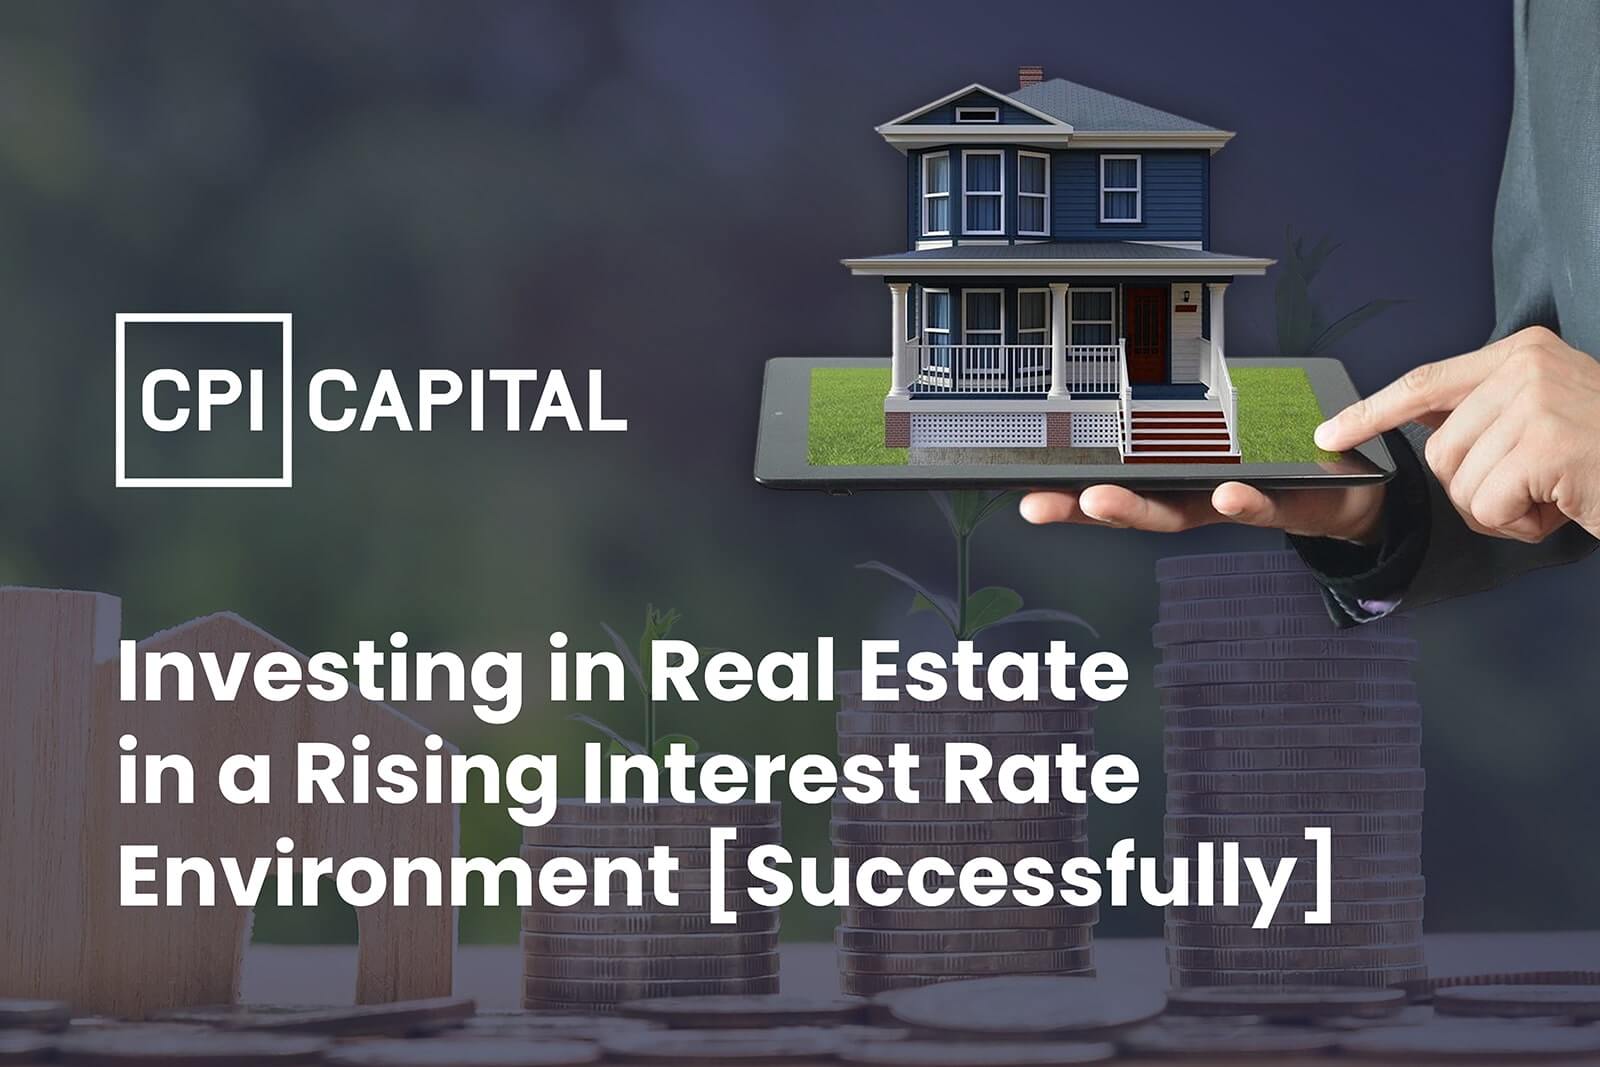 CPI capital Investing in Real Estate in a Rising Interest Rate Environment Successfully